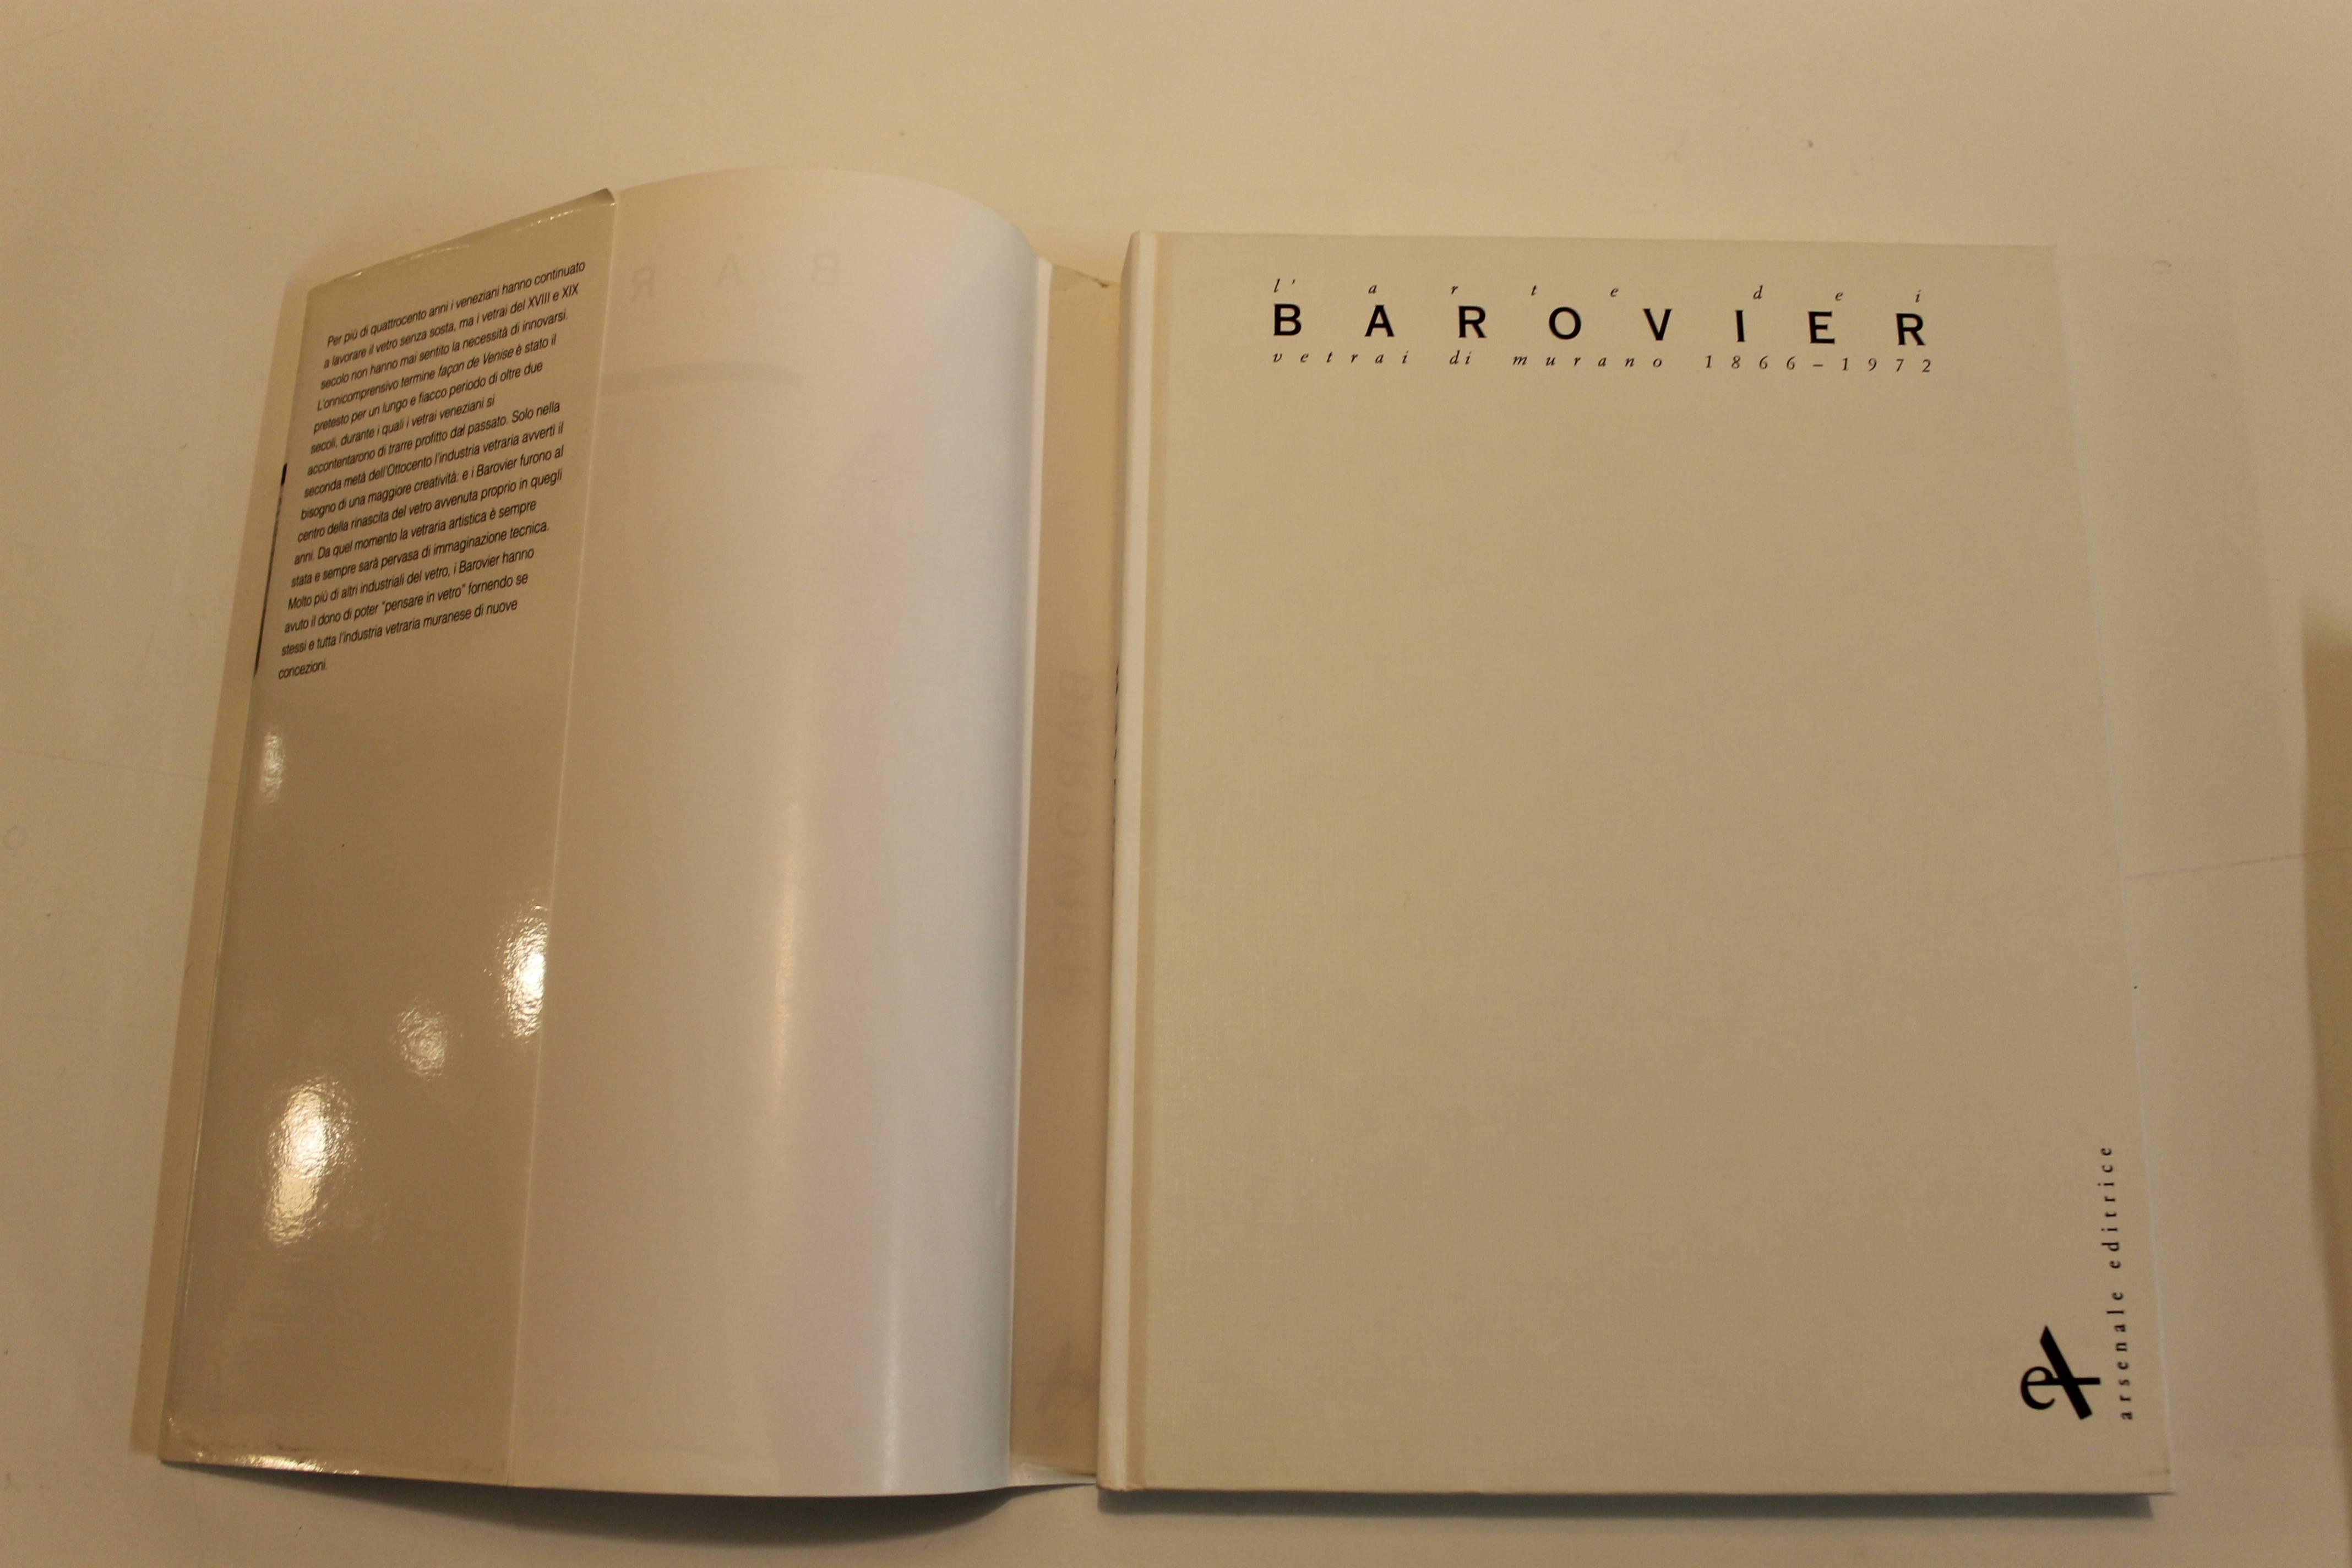 Barovier e Toso book by Marina Barovier 1993.

212 pages with 184 colored illustractions from 1866-1972.